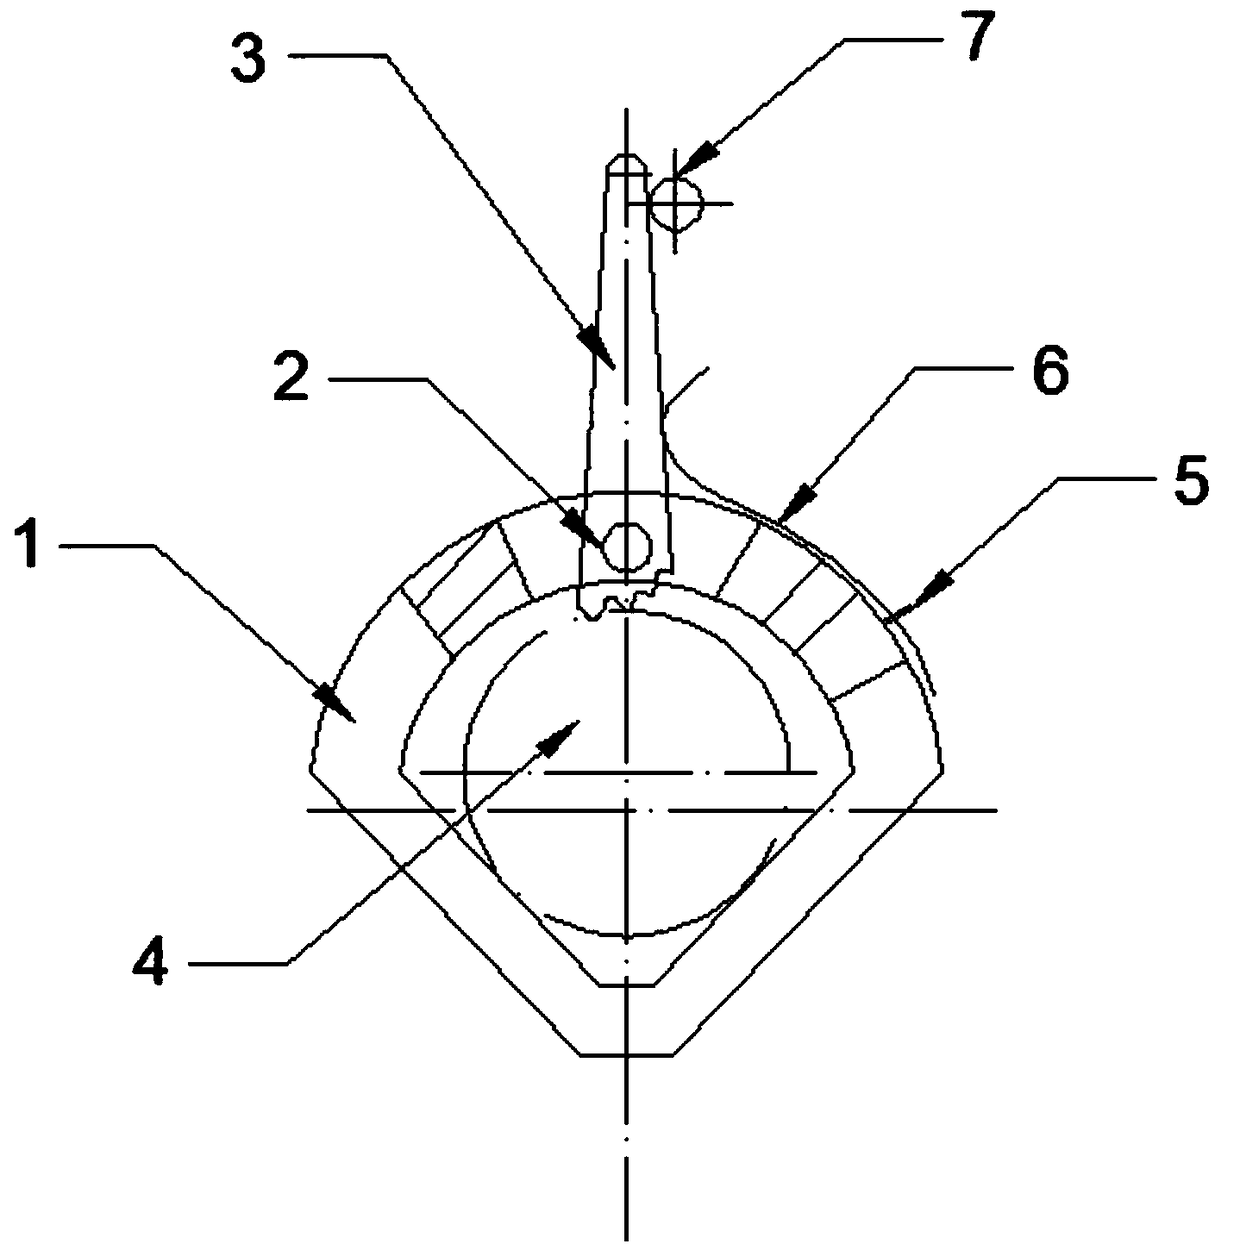 Quick self-clamping heart-shaped fixture